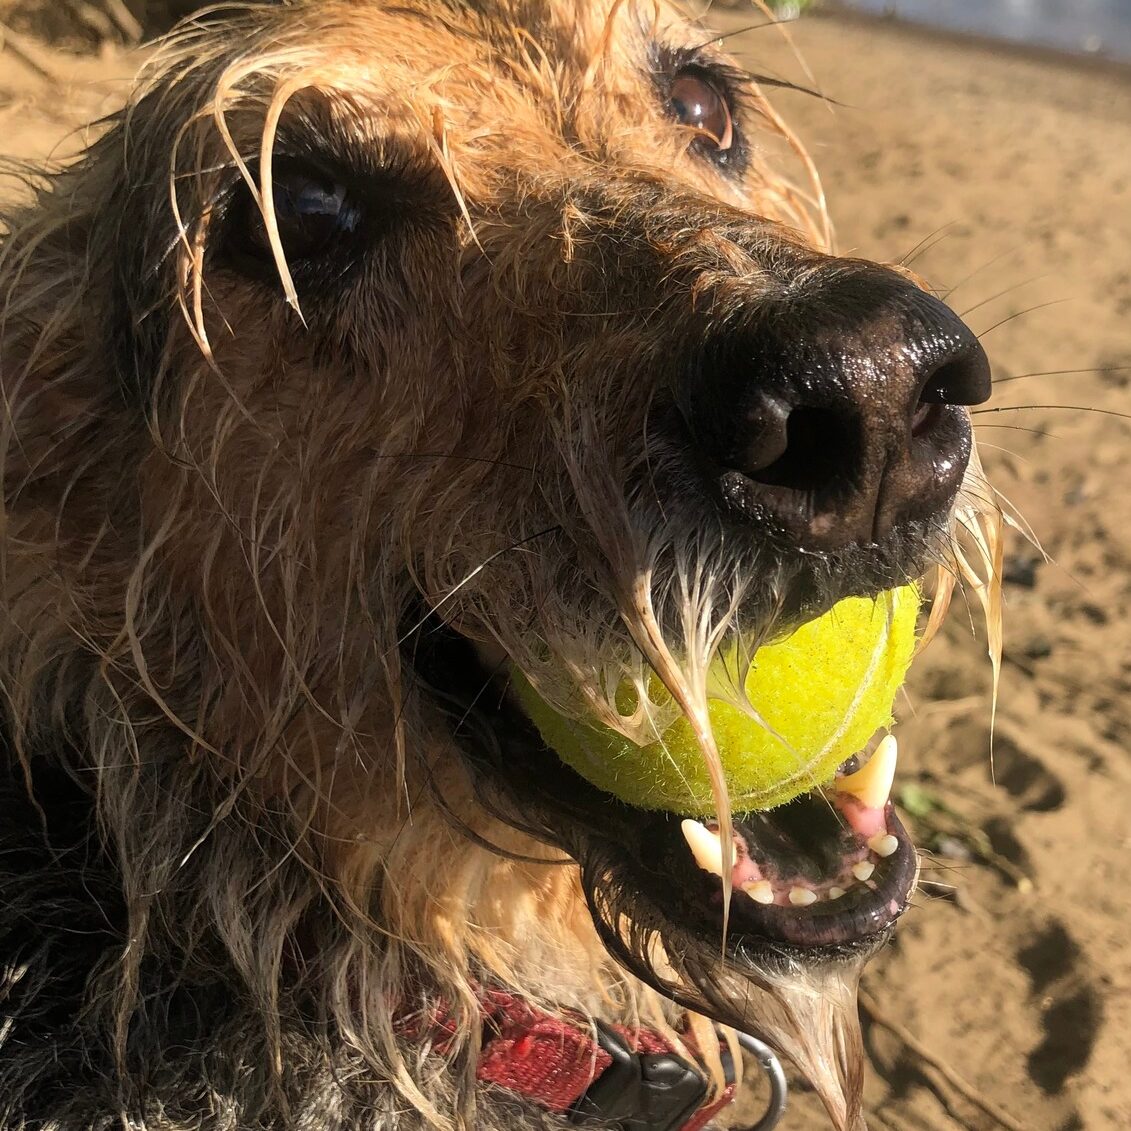 water soaked dog on beach with tennis ball in mouth looking into camera